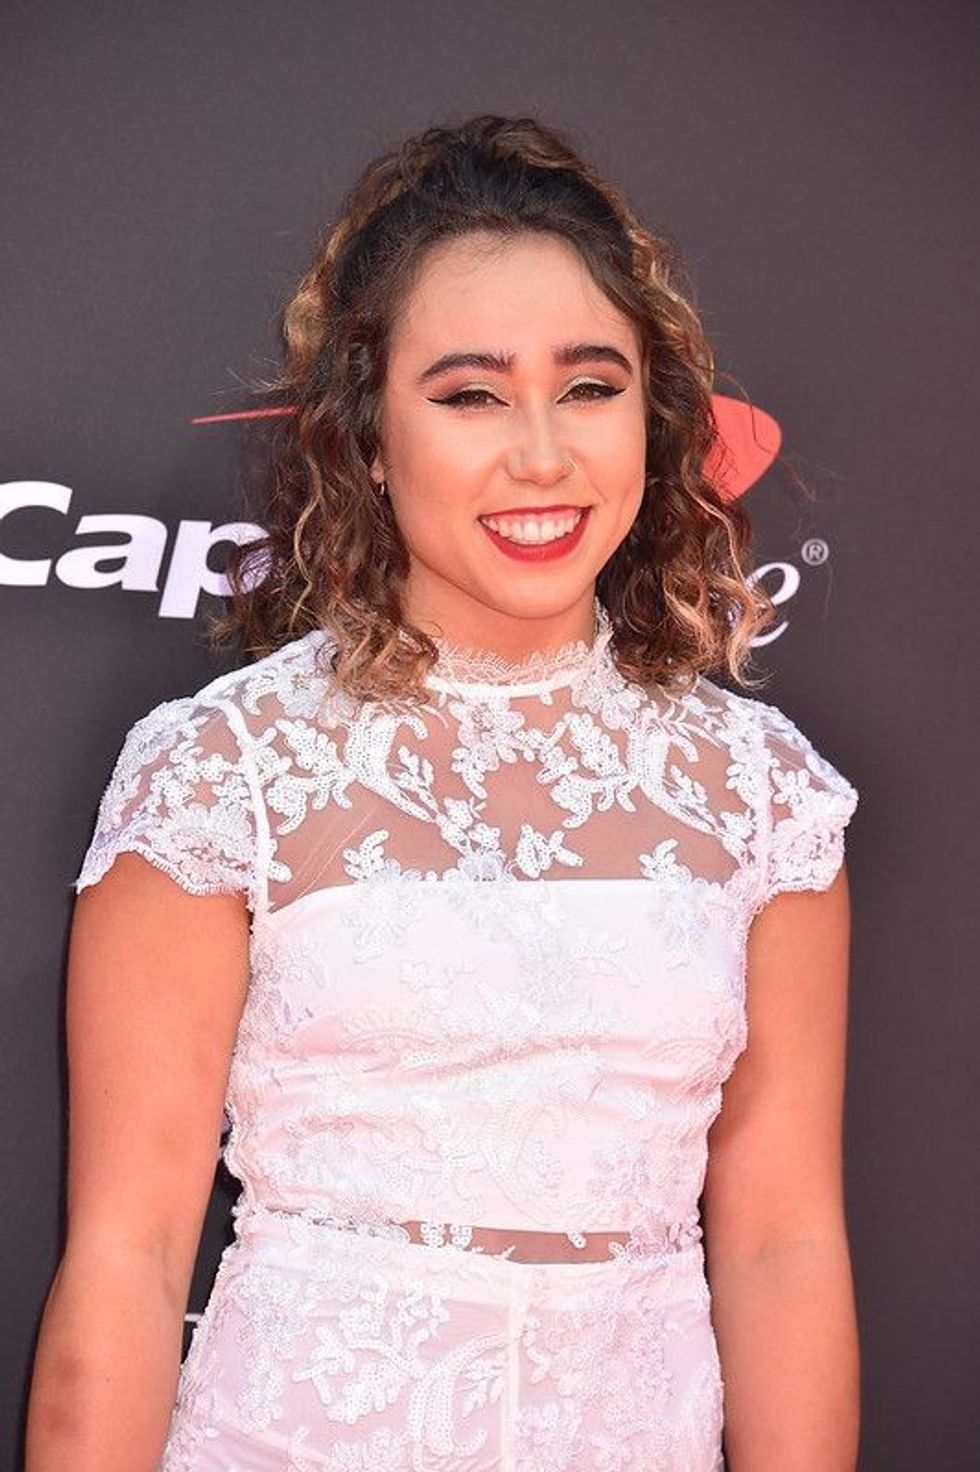 Discover all the fun facts about Katelyn Ohashi here on Kidadl.